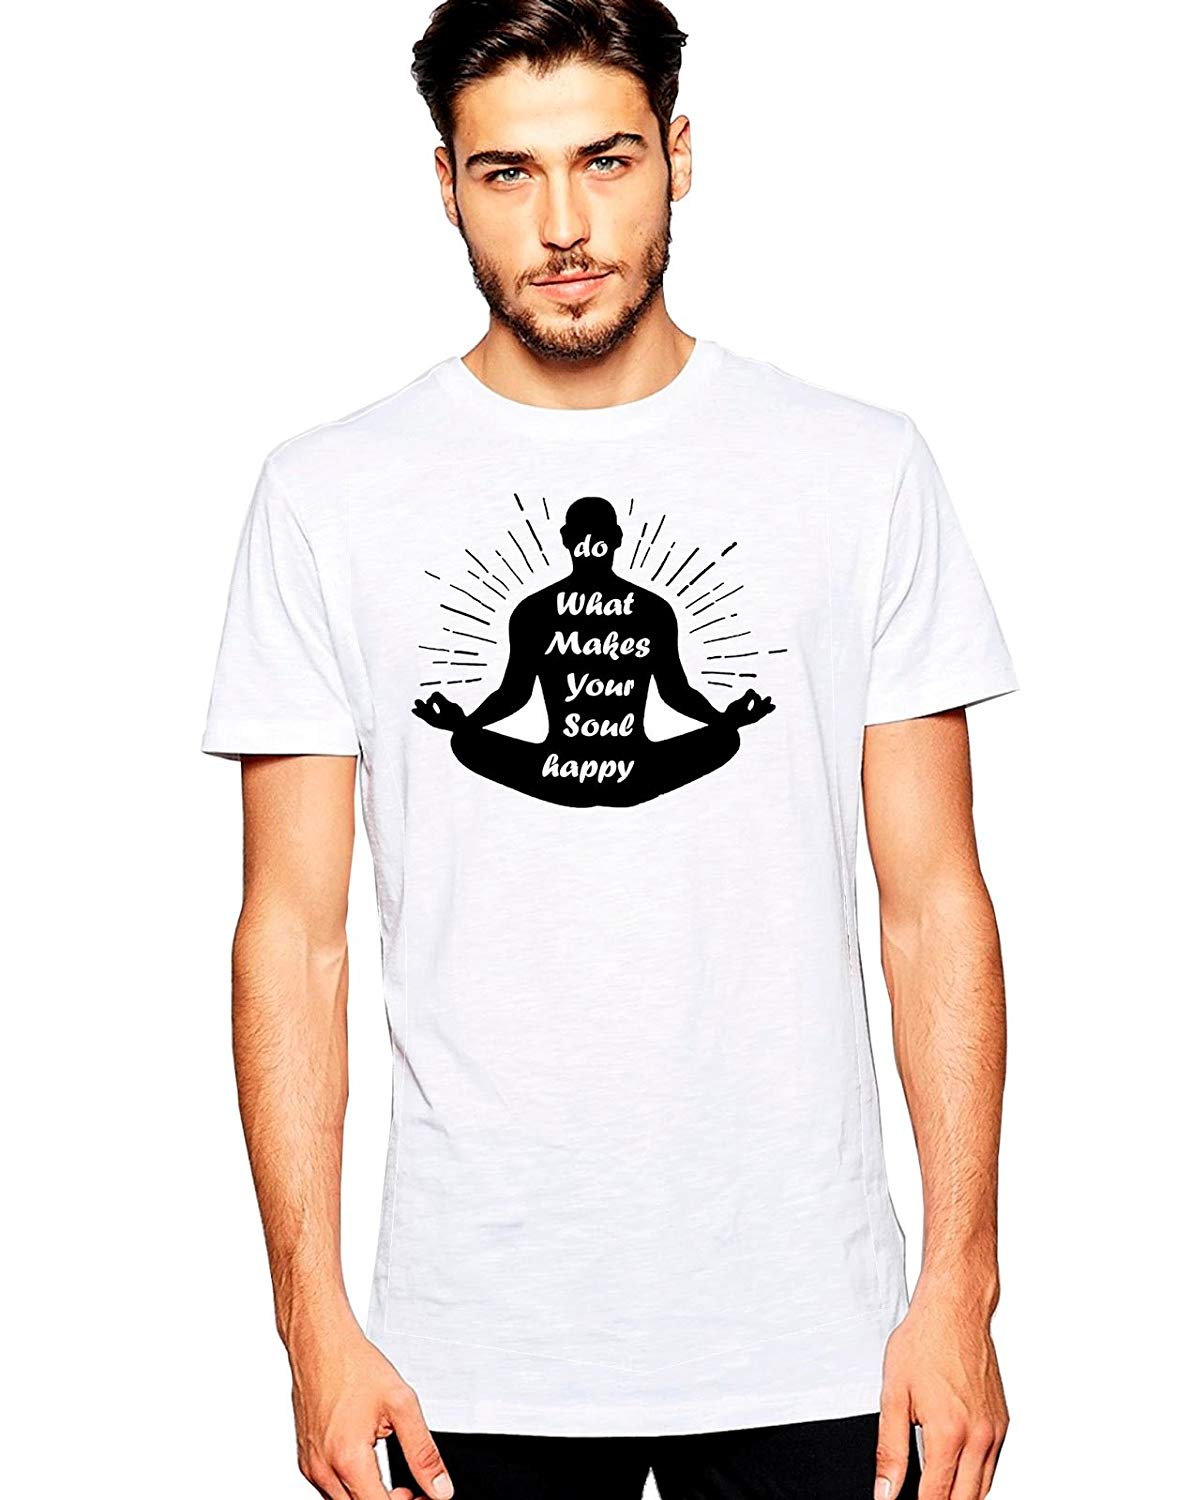 DOUBLE F ROUND NECK HALF SLEEVE WHITE COLOR DO WHAT MAKES YOUR SOUL HAPPY PRINTED T-SHIRT FOR MEN